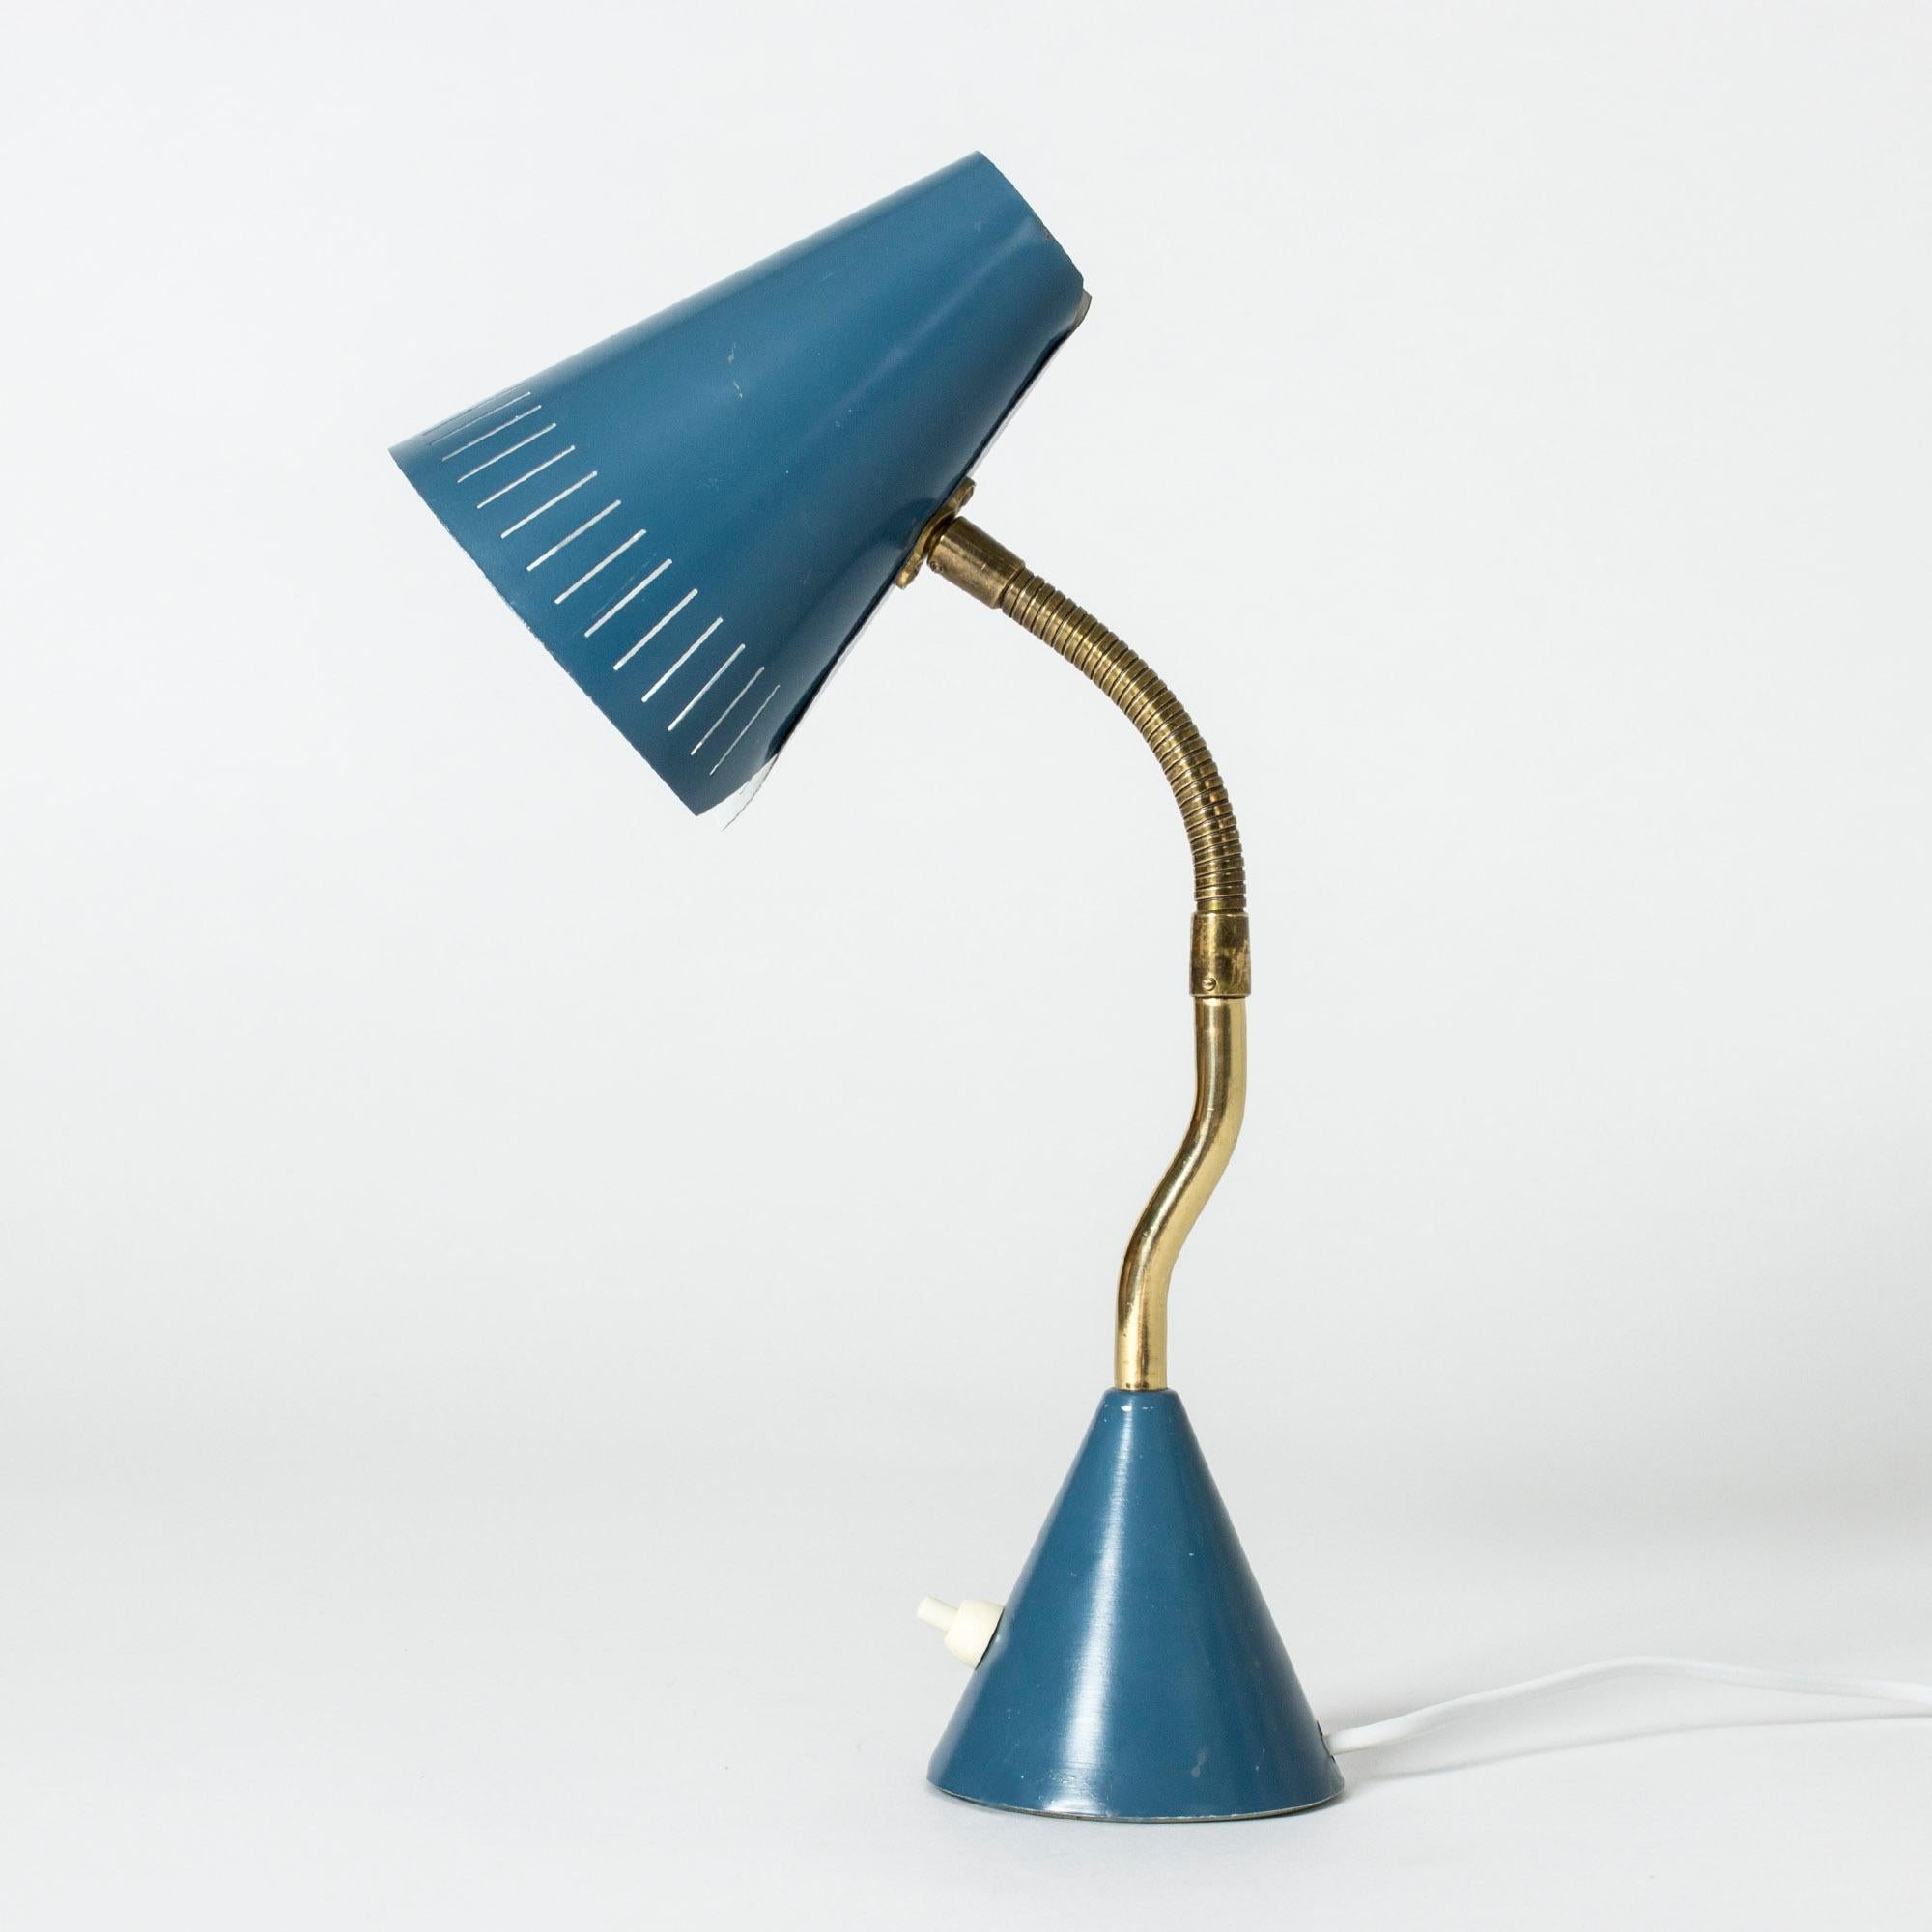 Elegant desk lamp from Falkenbergs Belysning in a beautiful teal color and brass neck. Neat wraparound design of the shade.